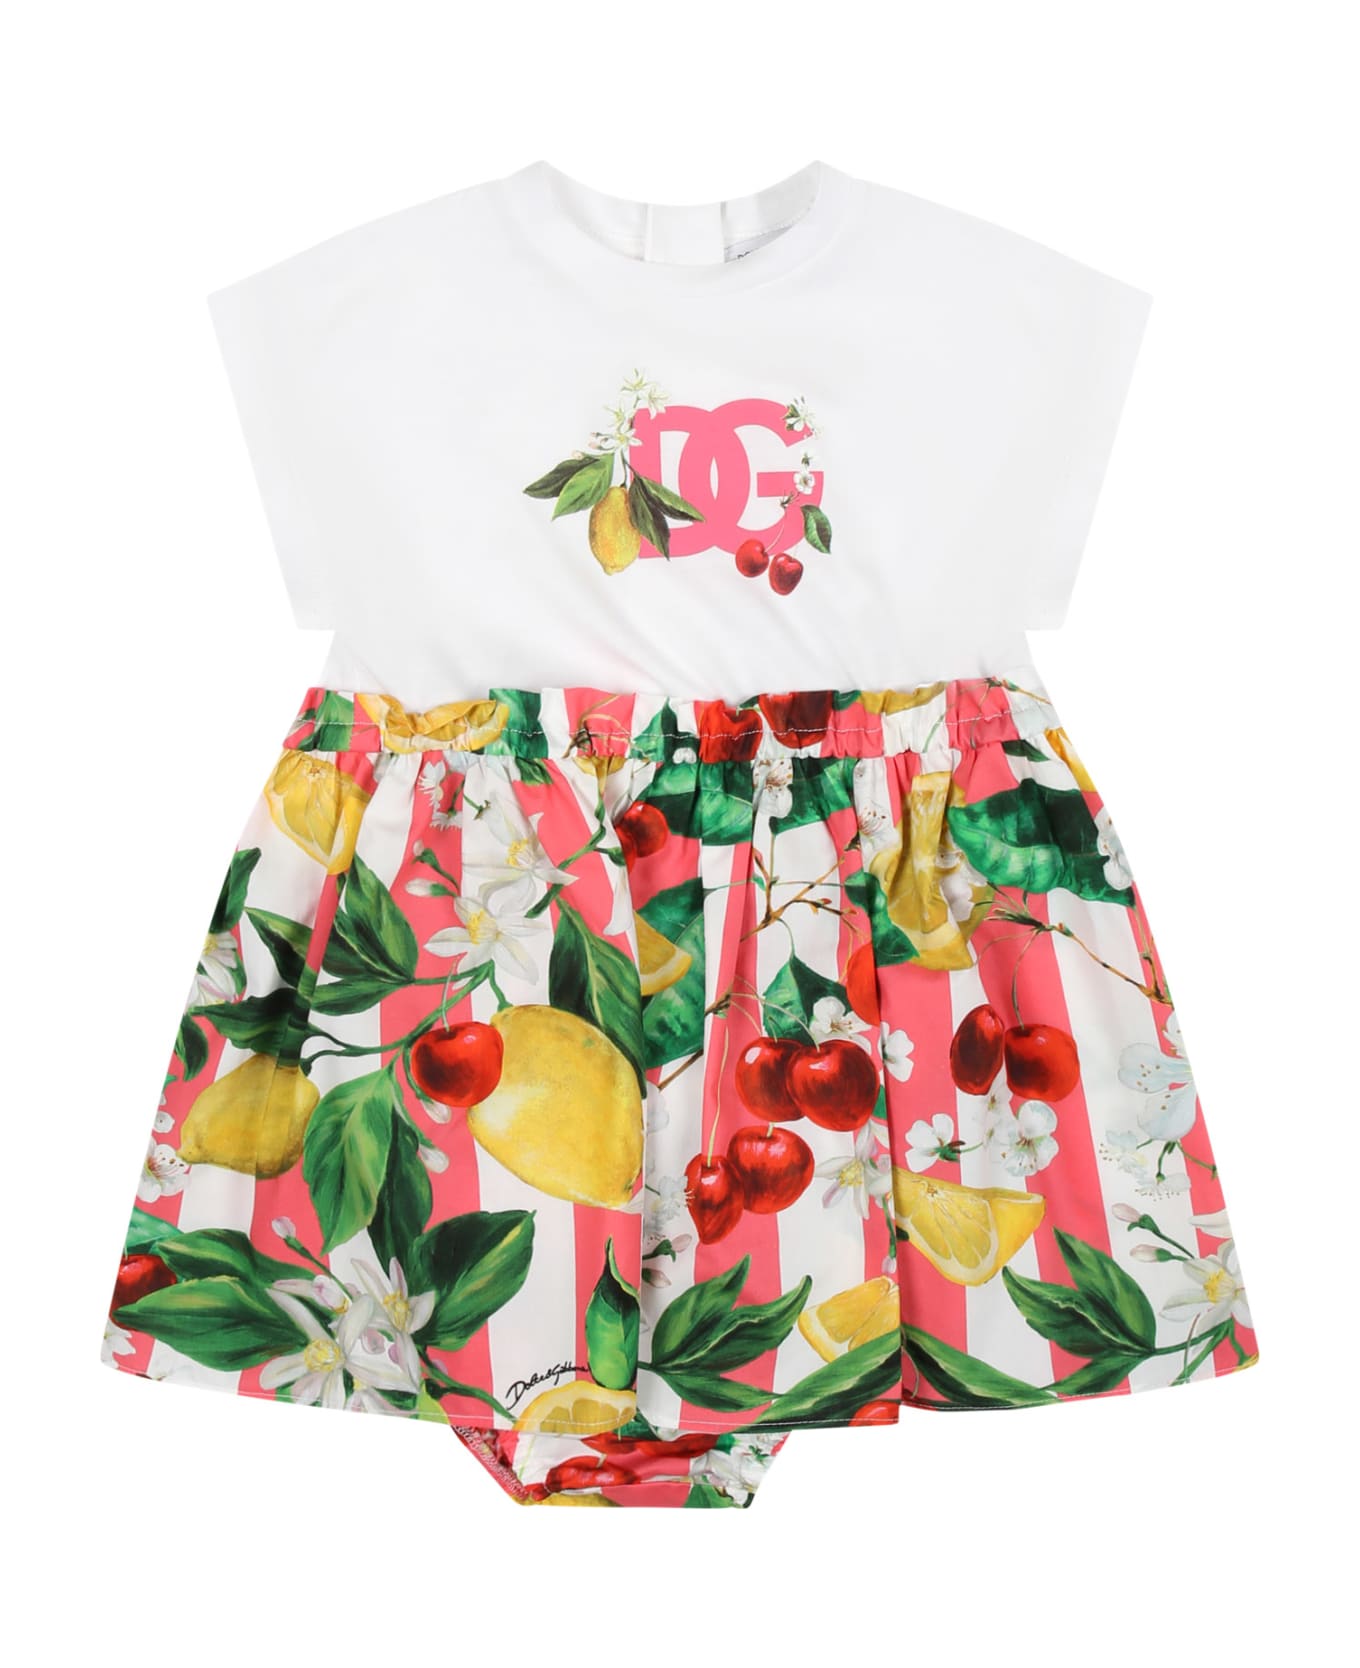 Dolce & Gabbana White Dress For Baby Girl With All-over Multicolor Fruits And Flowers - Multicolore